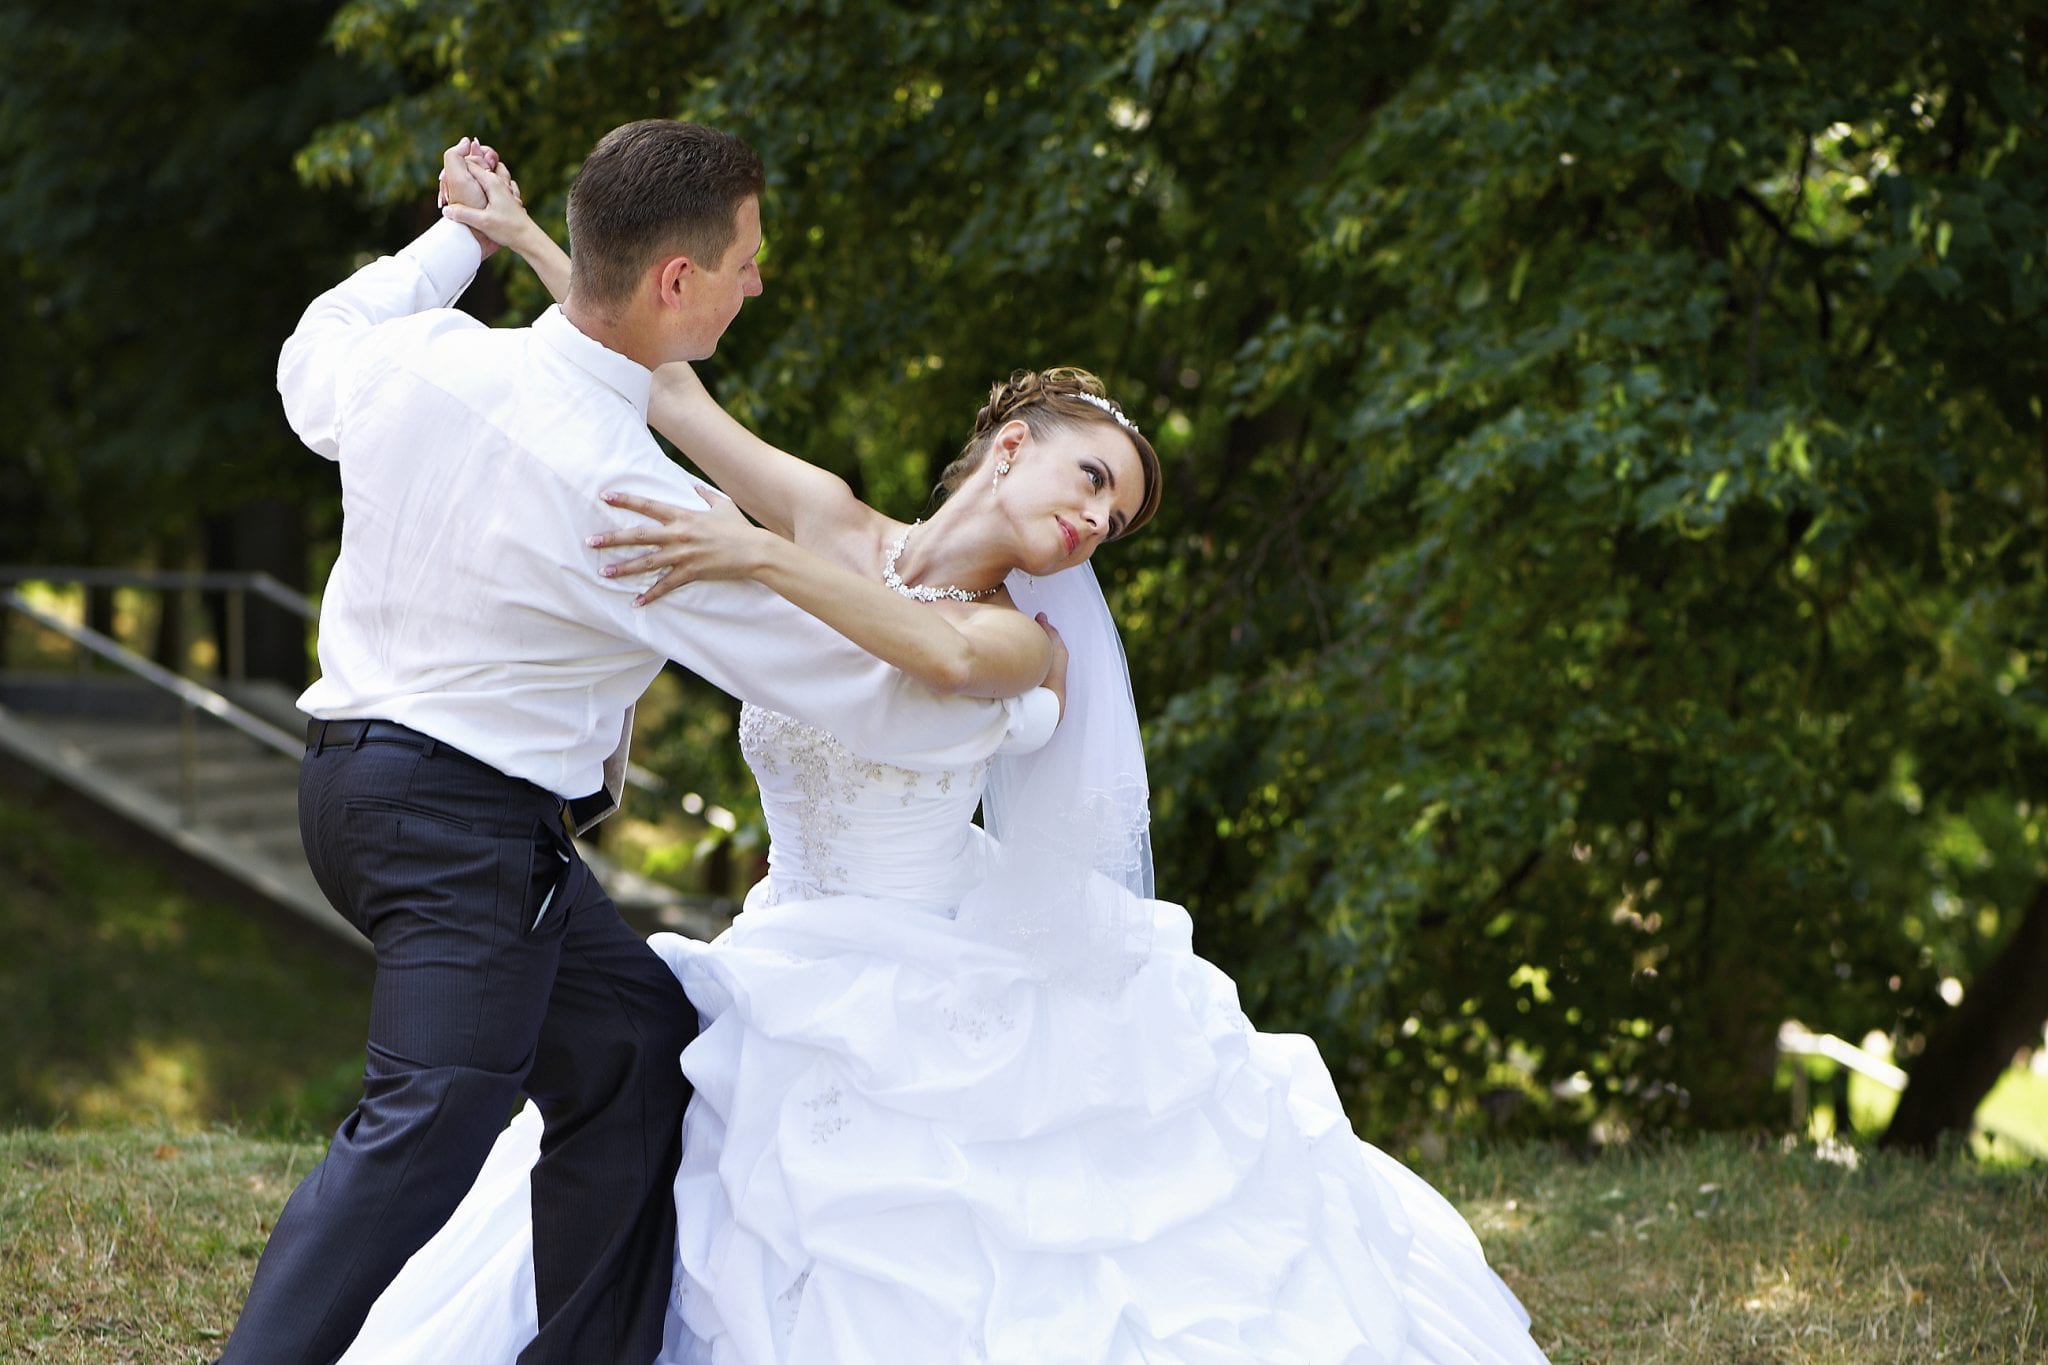 Wedding Dance Traditions in Different Cultures - Harper Wedding Venues